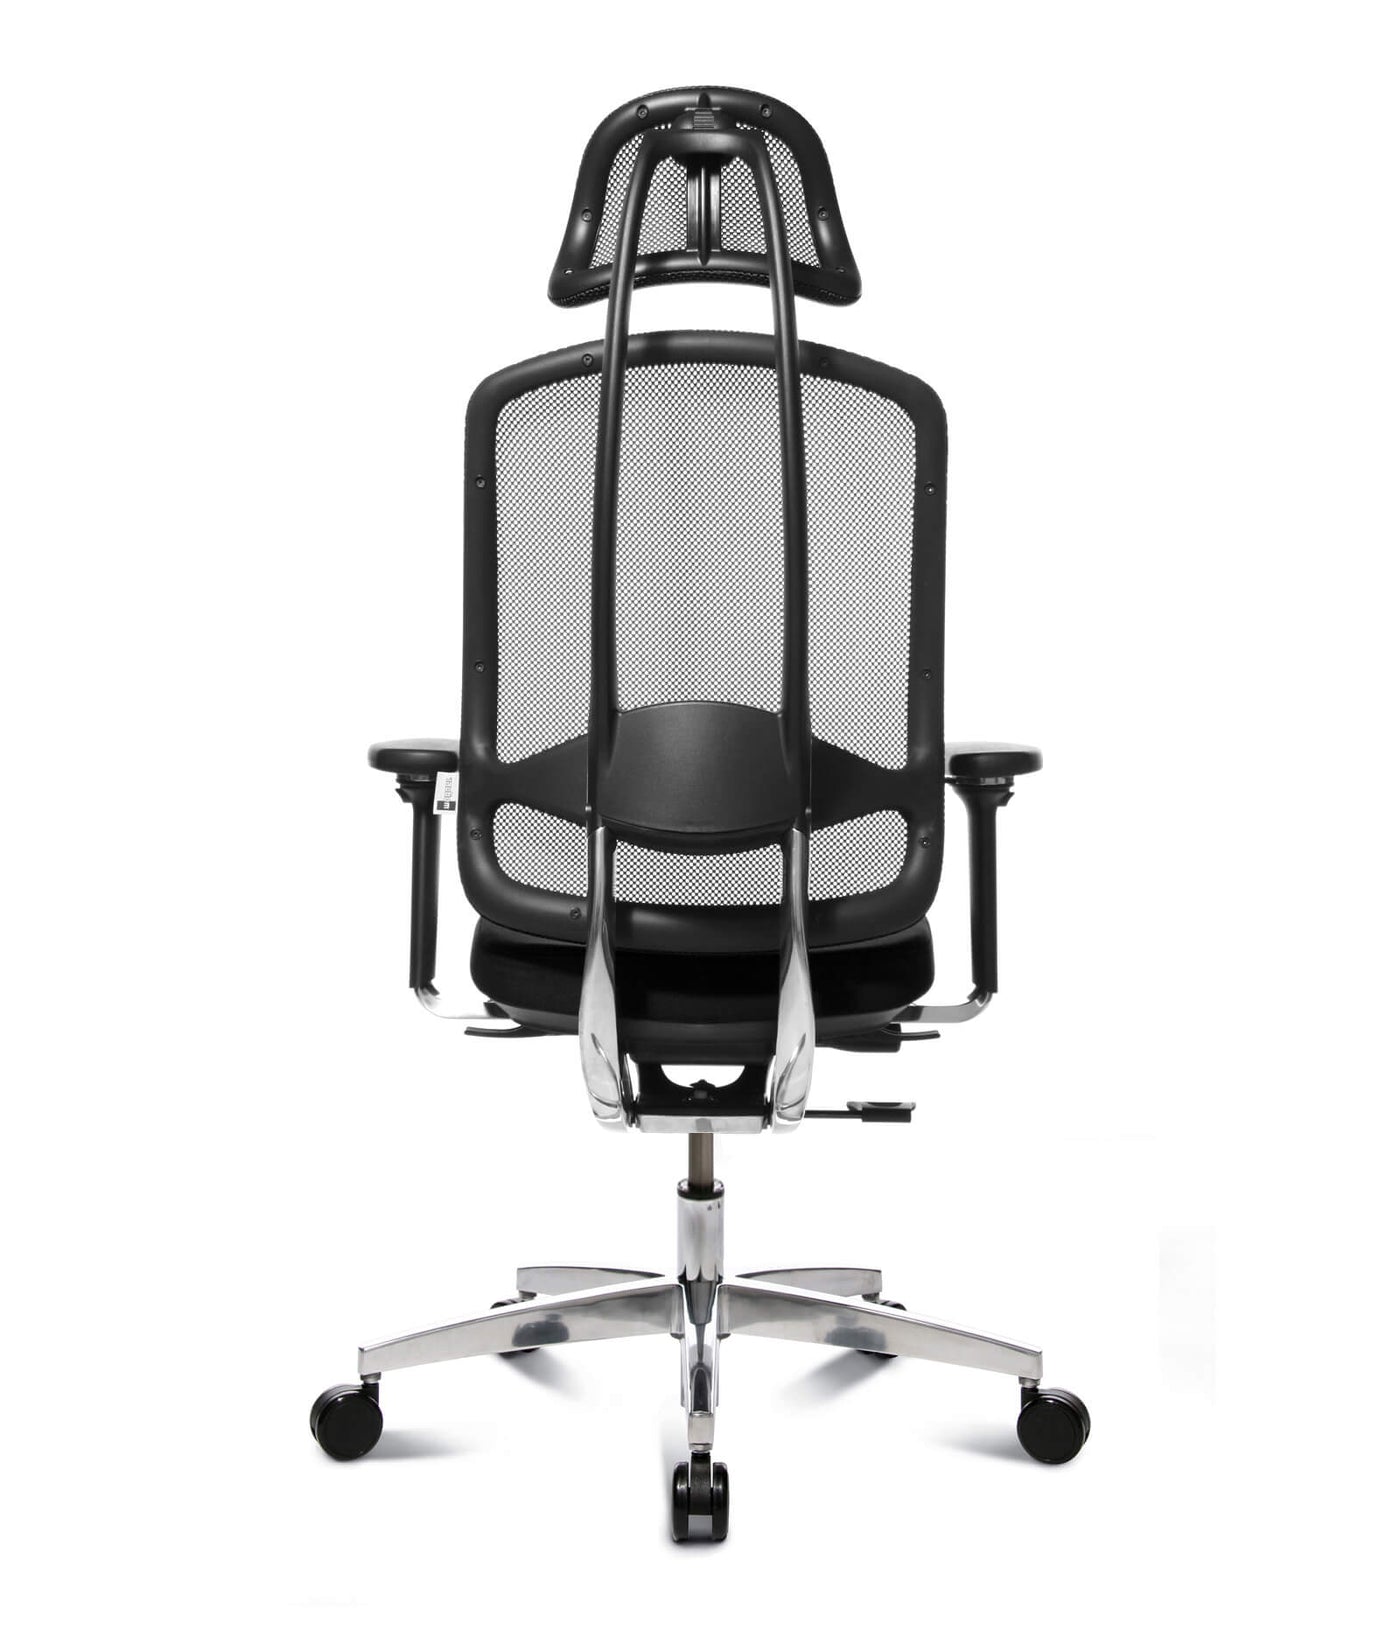 Wagner - AluMedic 10 Chefsessel - OFFICE CHAIRS - 123HomeOffice